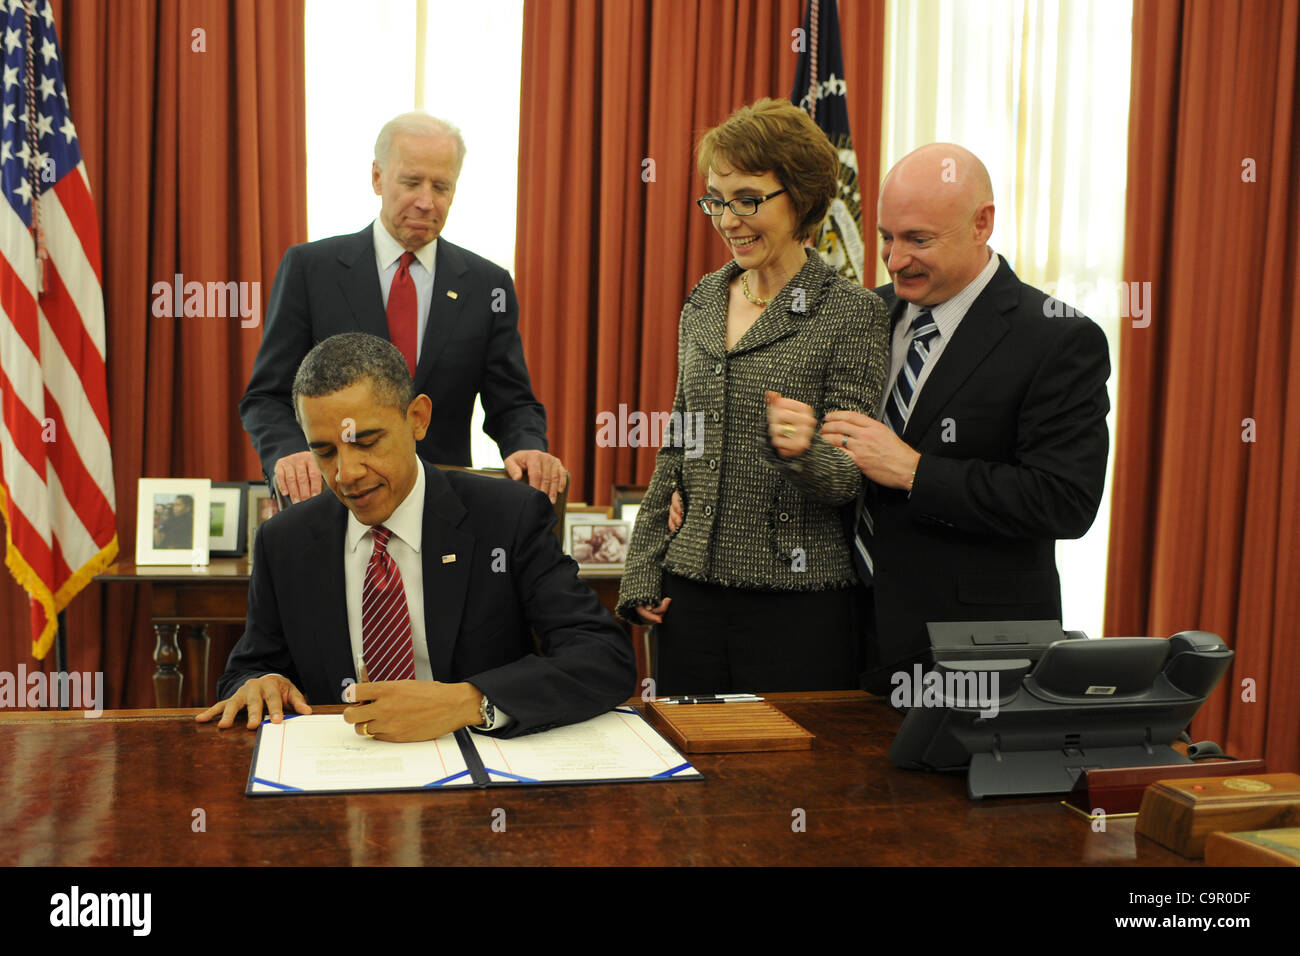 Feb. 10, 2012 - Washington, District of Columbia, U.S. - The President  signs H.R. 3801, the Ultralight Aircraft Smuggling Prevention Act of 2012. This bill is the last piece of legislation that former Representative Gabrielle Giffords sponsored and voted on in the U.S. House of Representatives. The Stock Photo